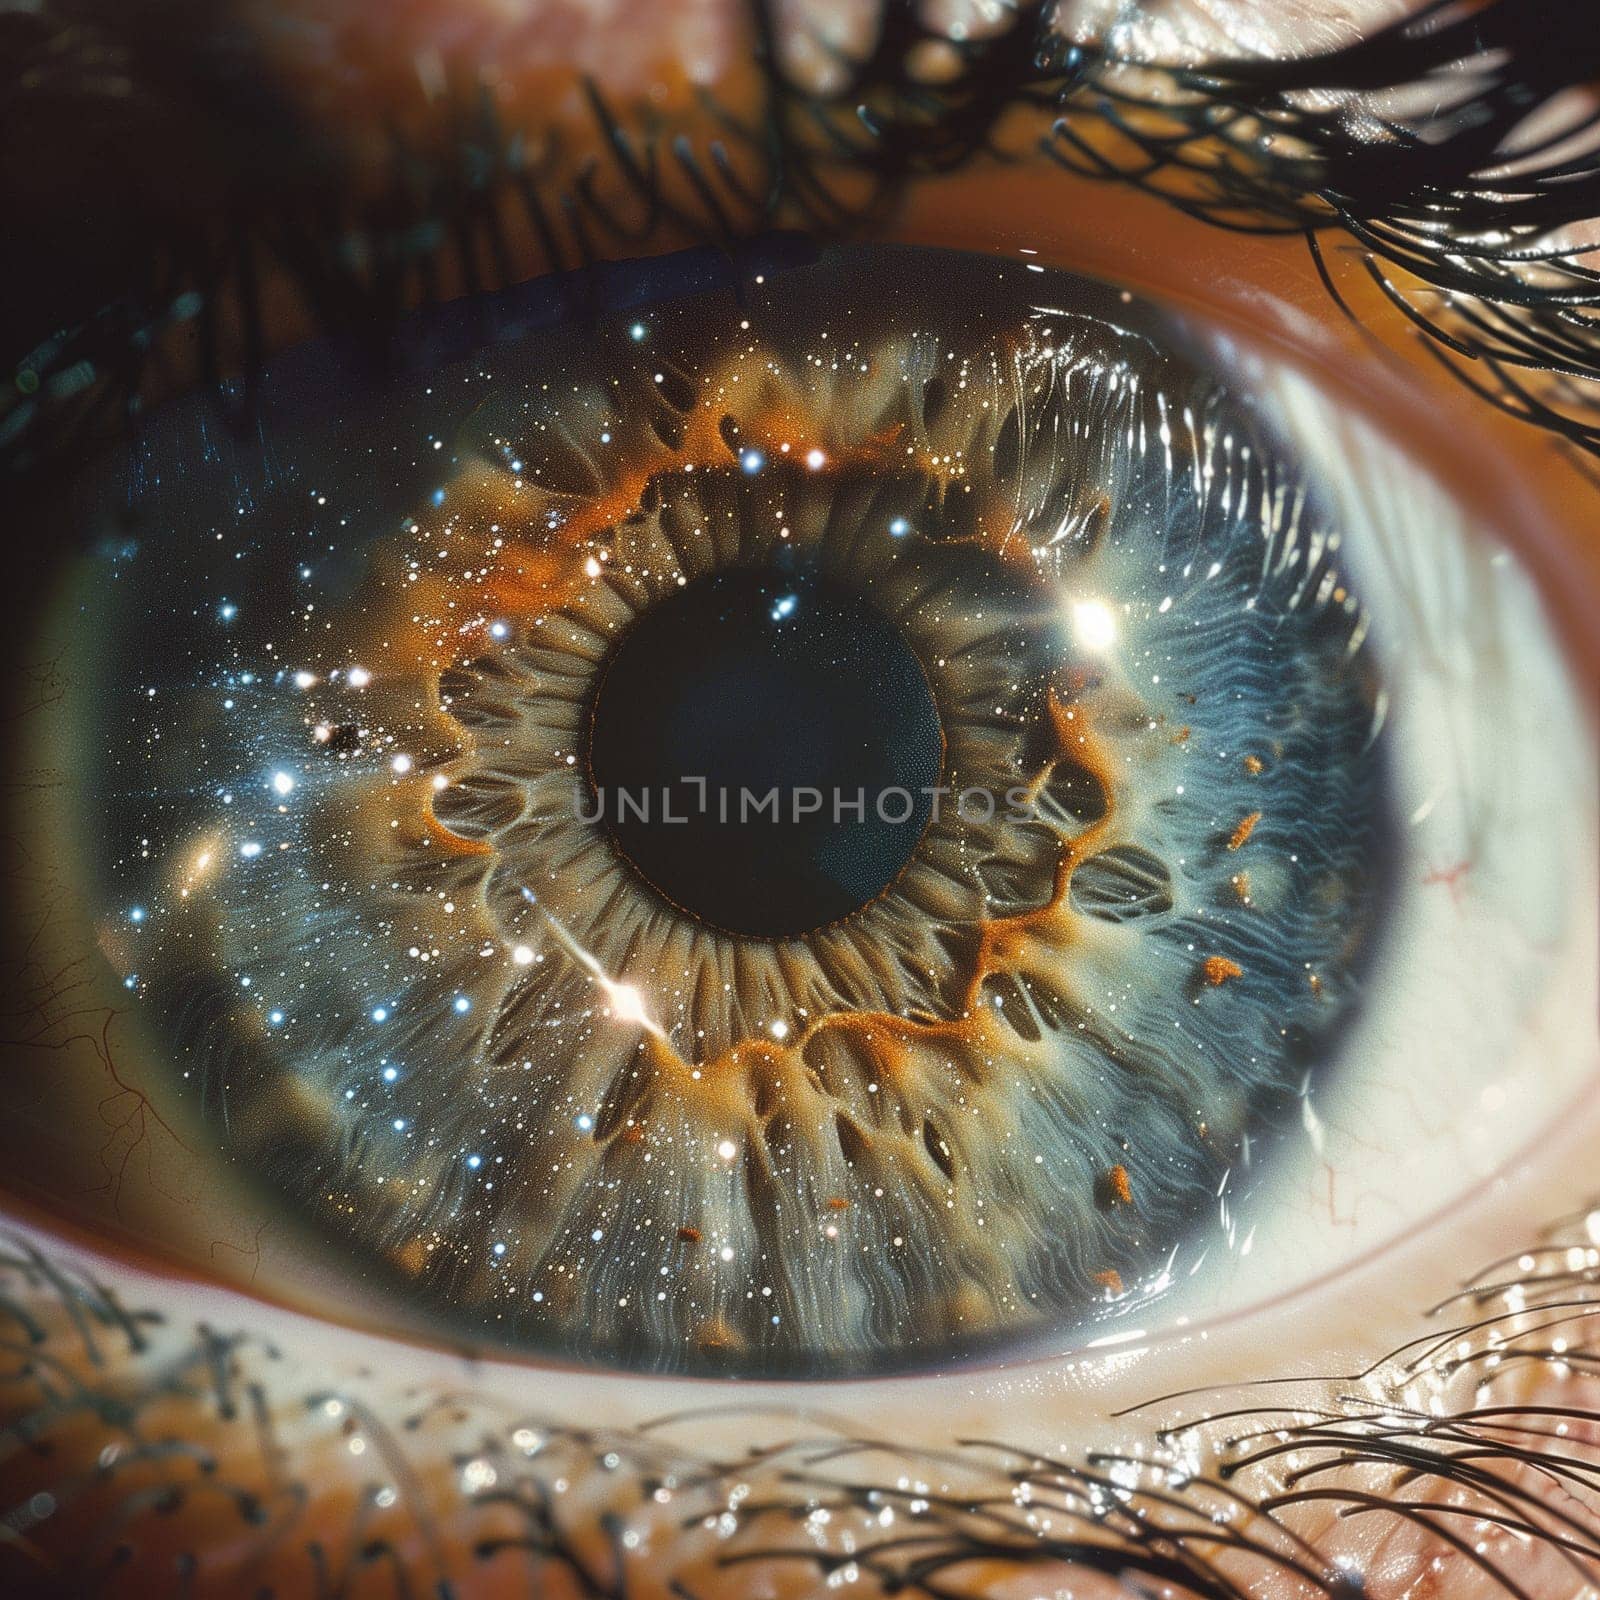 Beautiful close-up photo of the eye by NeuroSky